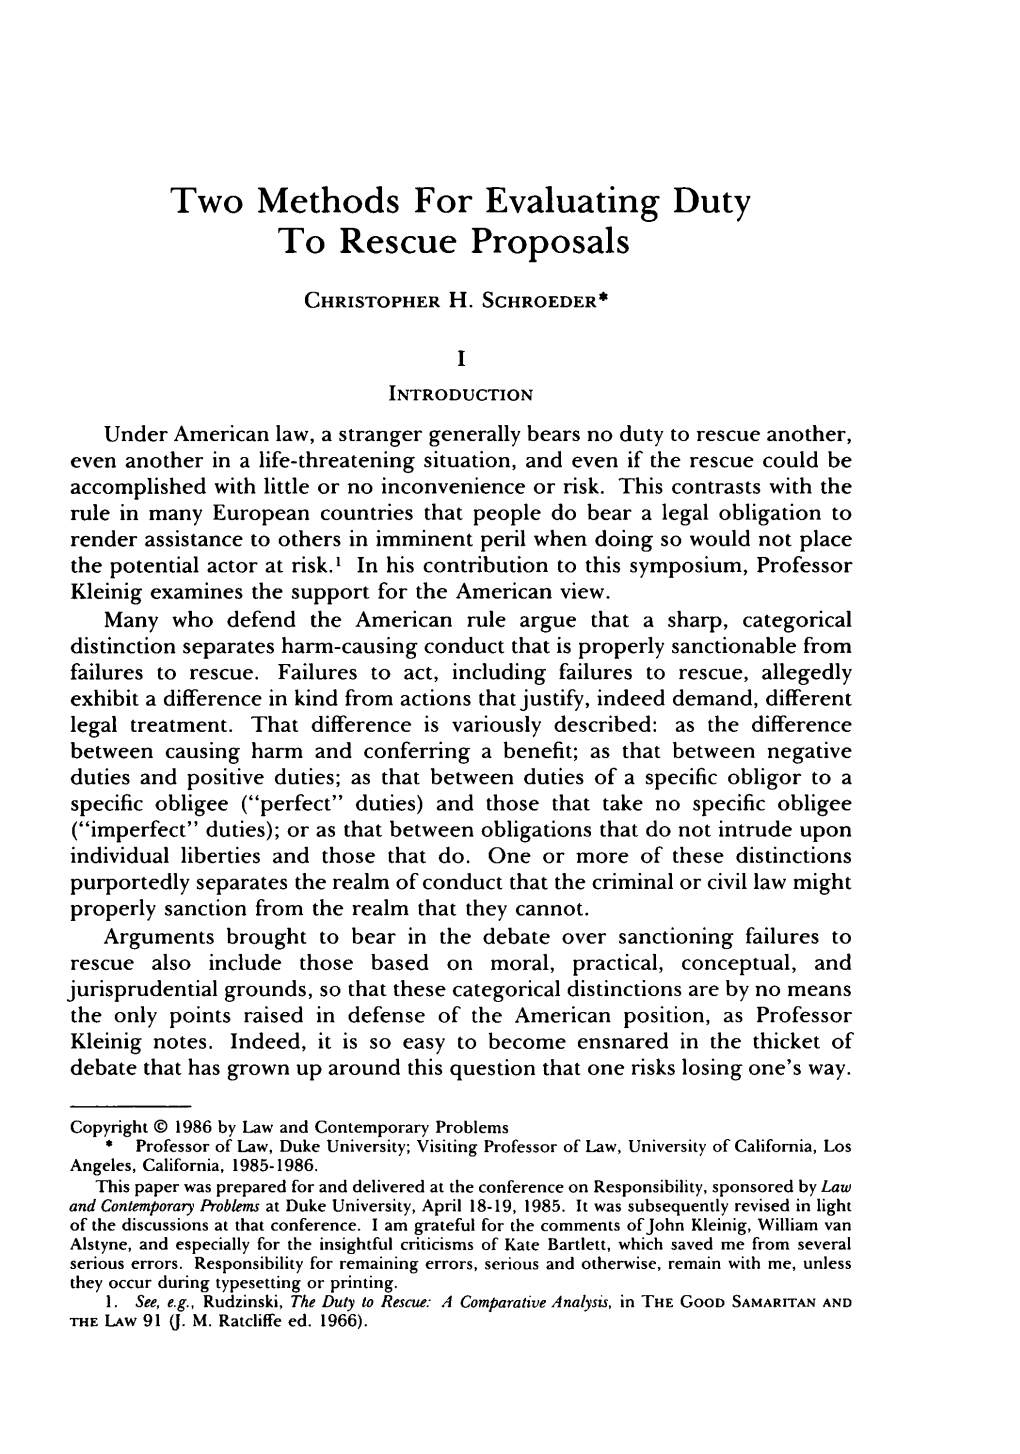 Two Methods for Evaluating Duty to Rescue Proposals